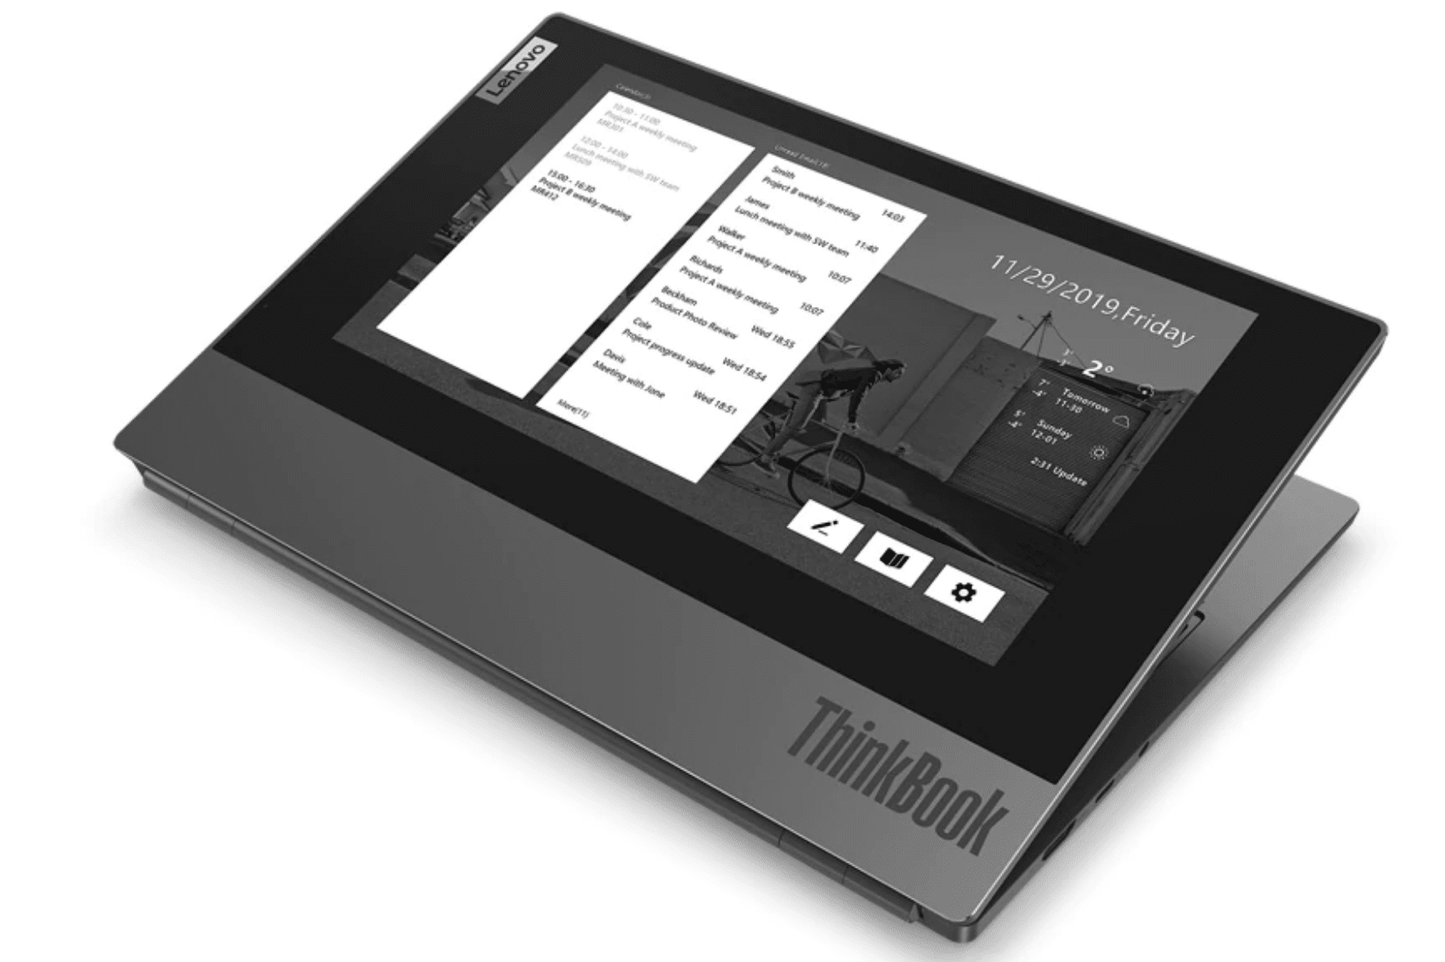 Lenovo Thinkbook Plus 13 inch dual screen laptop with E INK